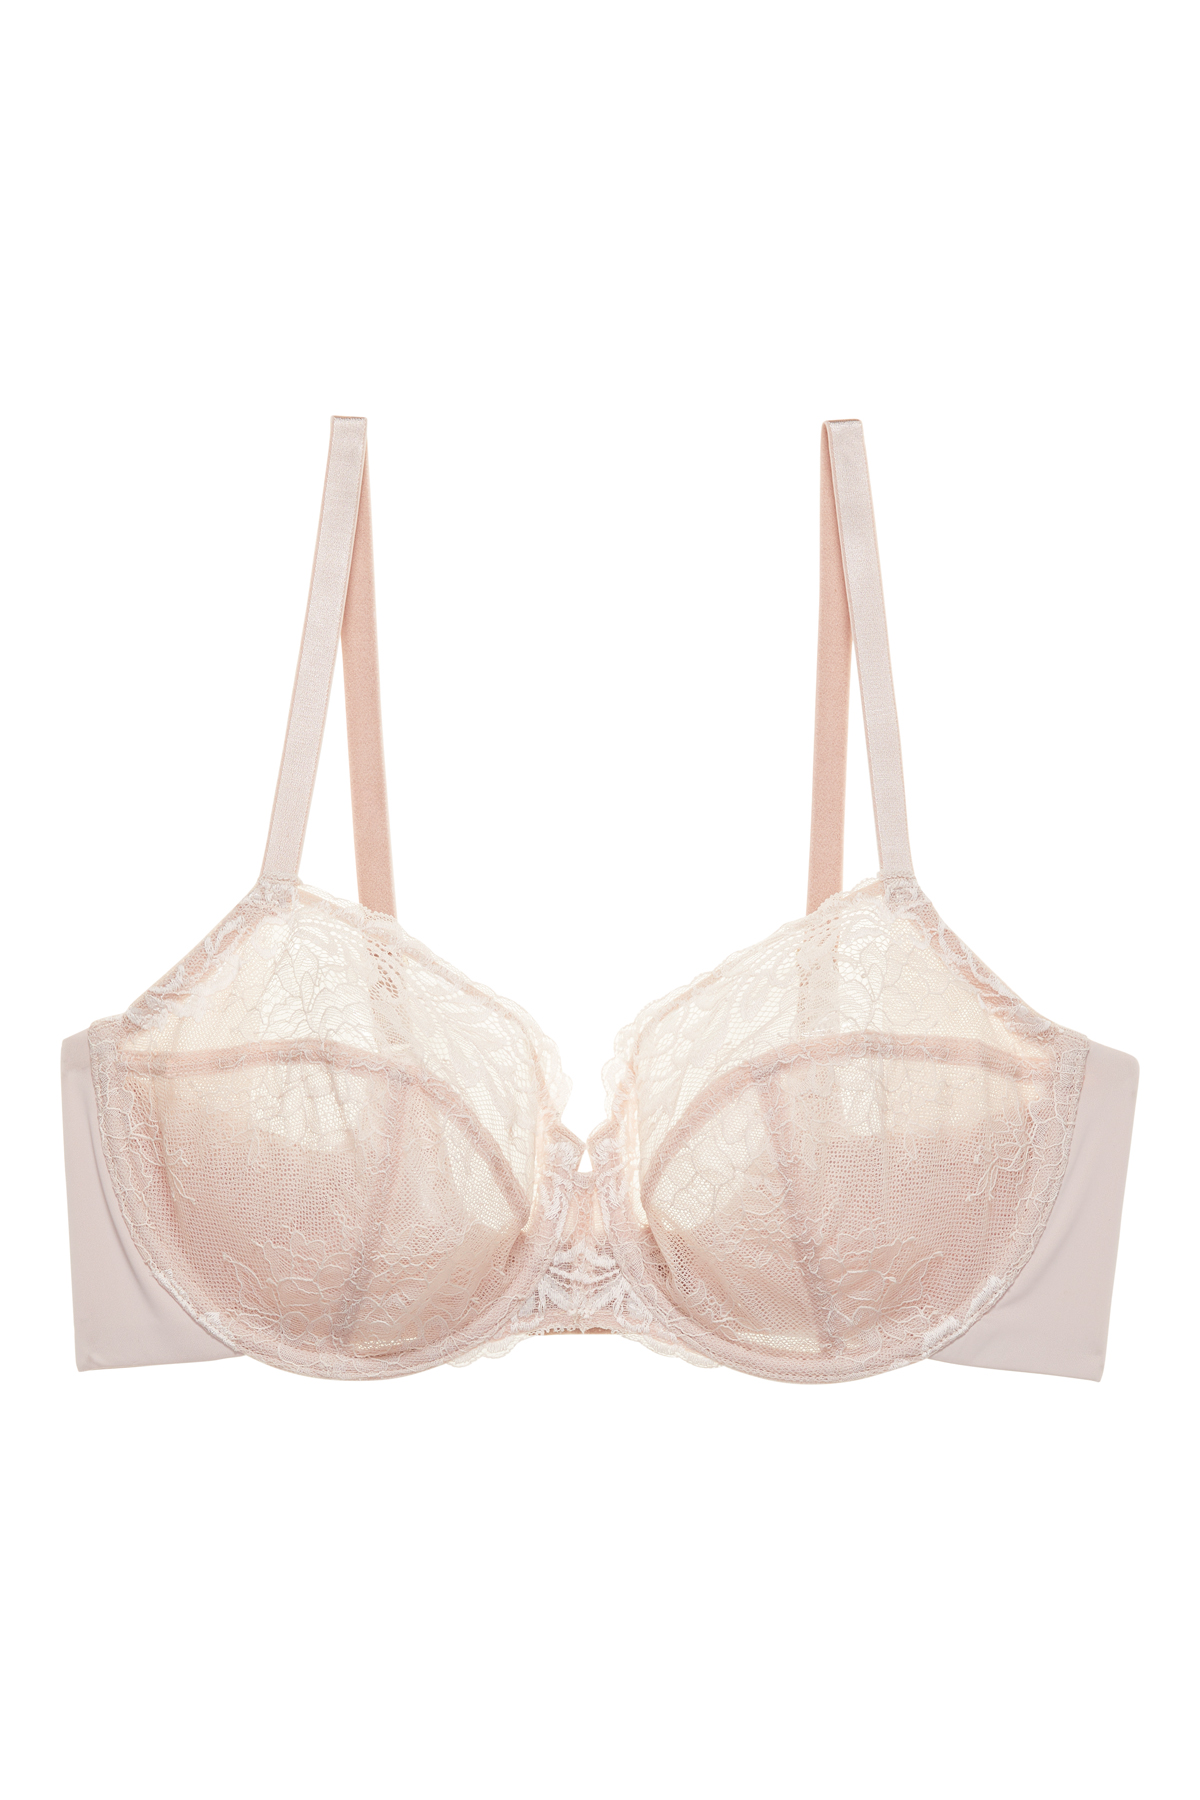 Natori Feathers Underwire Contour Bra, Hands Down, These Are the 11 Best  Bras For Small Busts